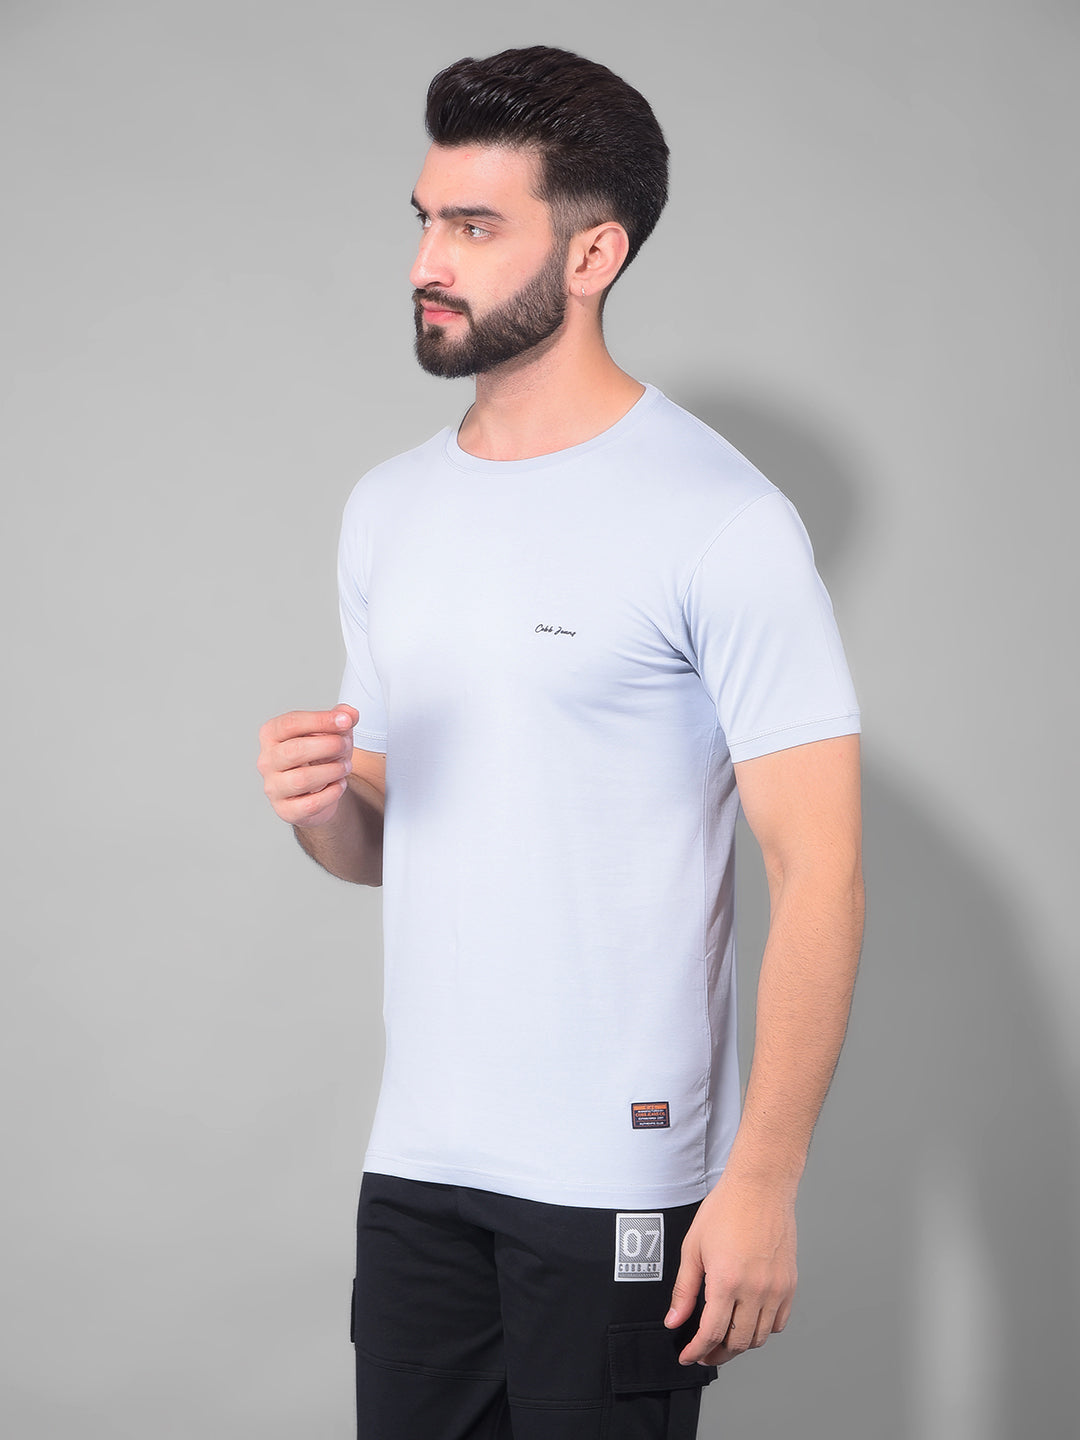 cobb solid periwinkle round neck t-shirt